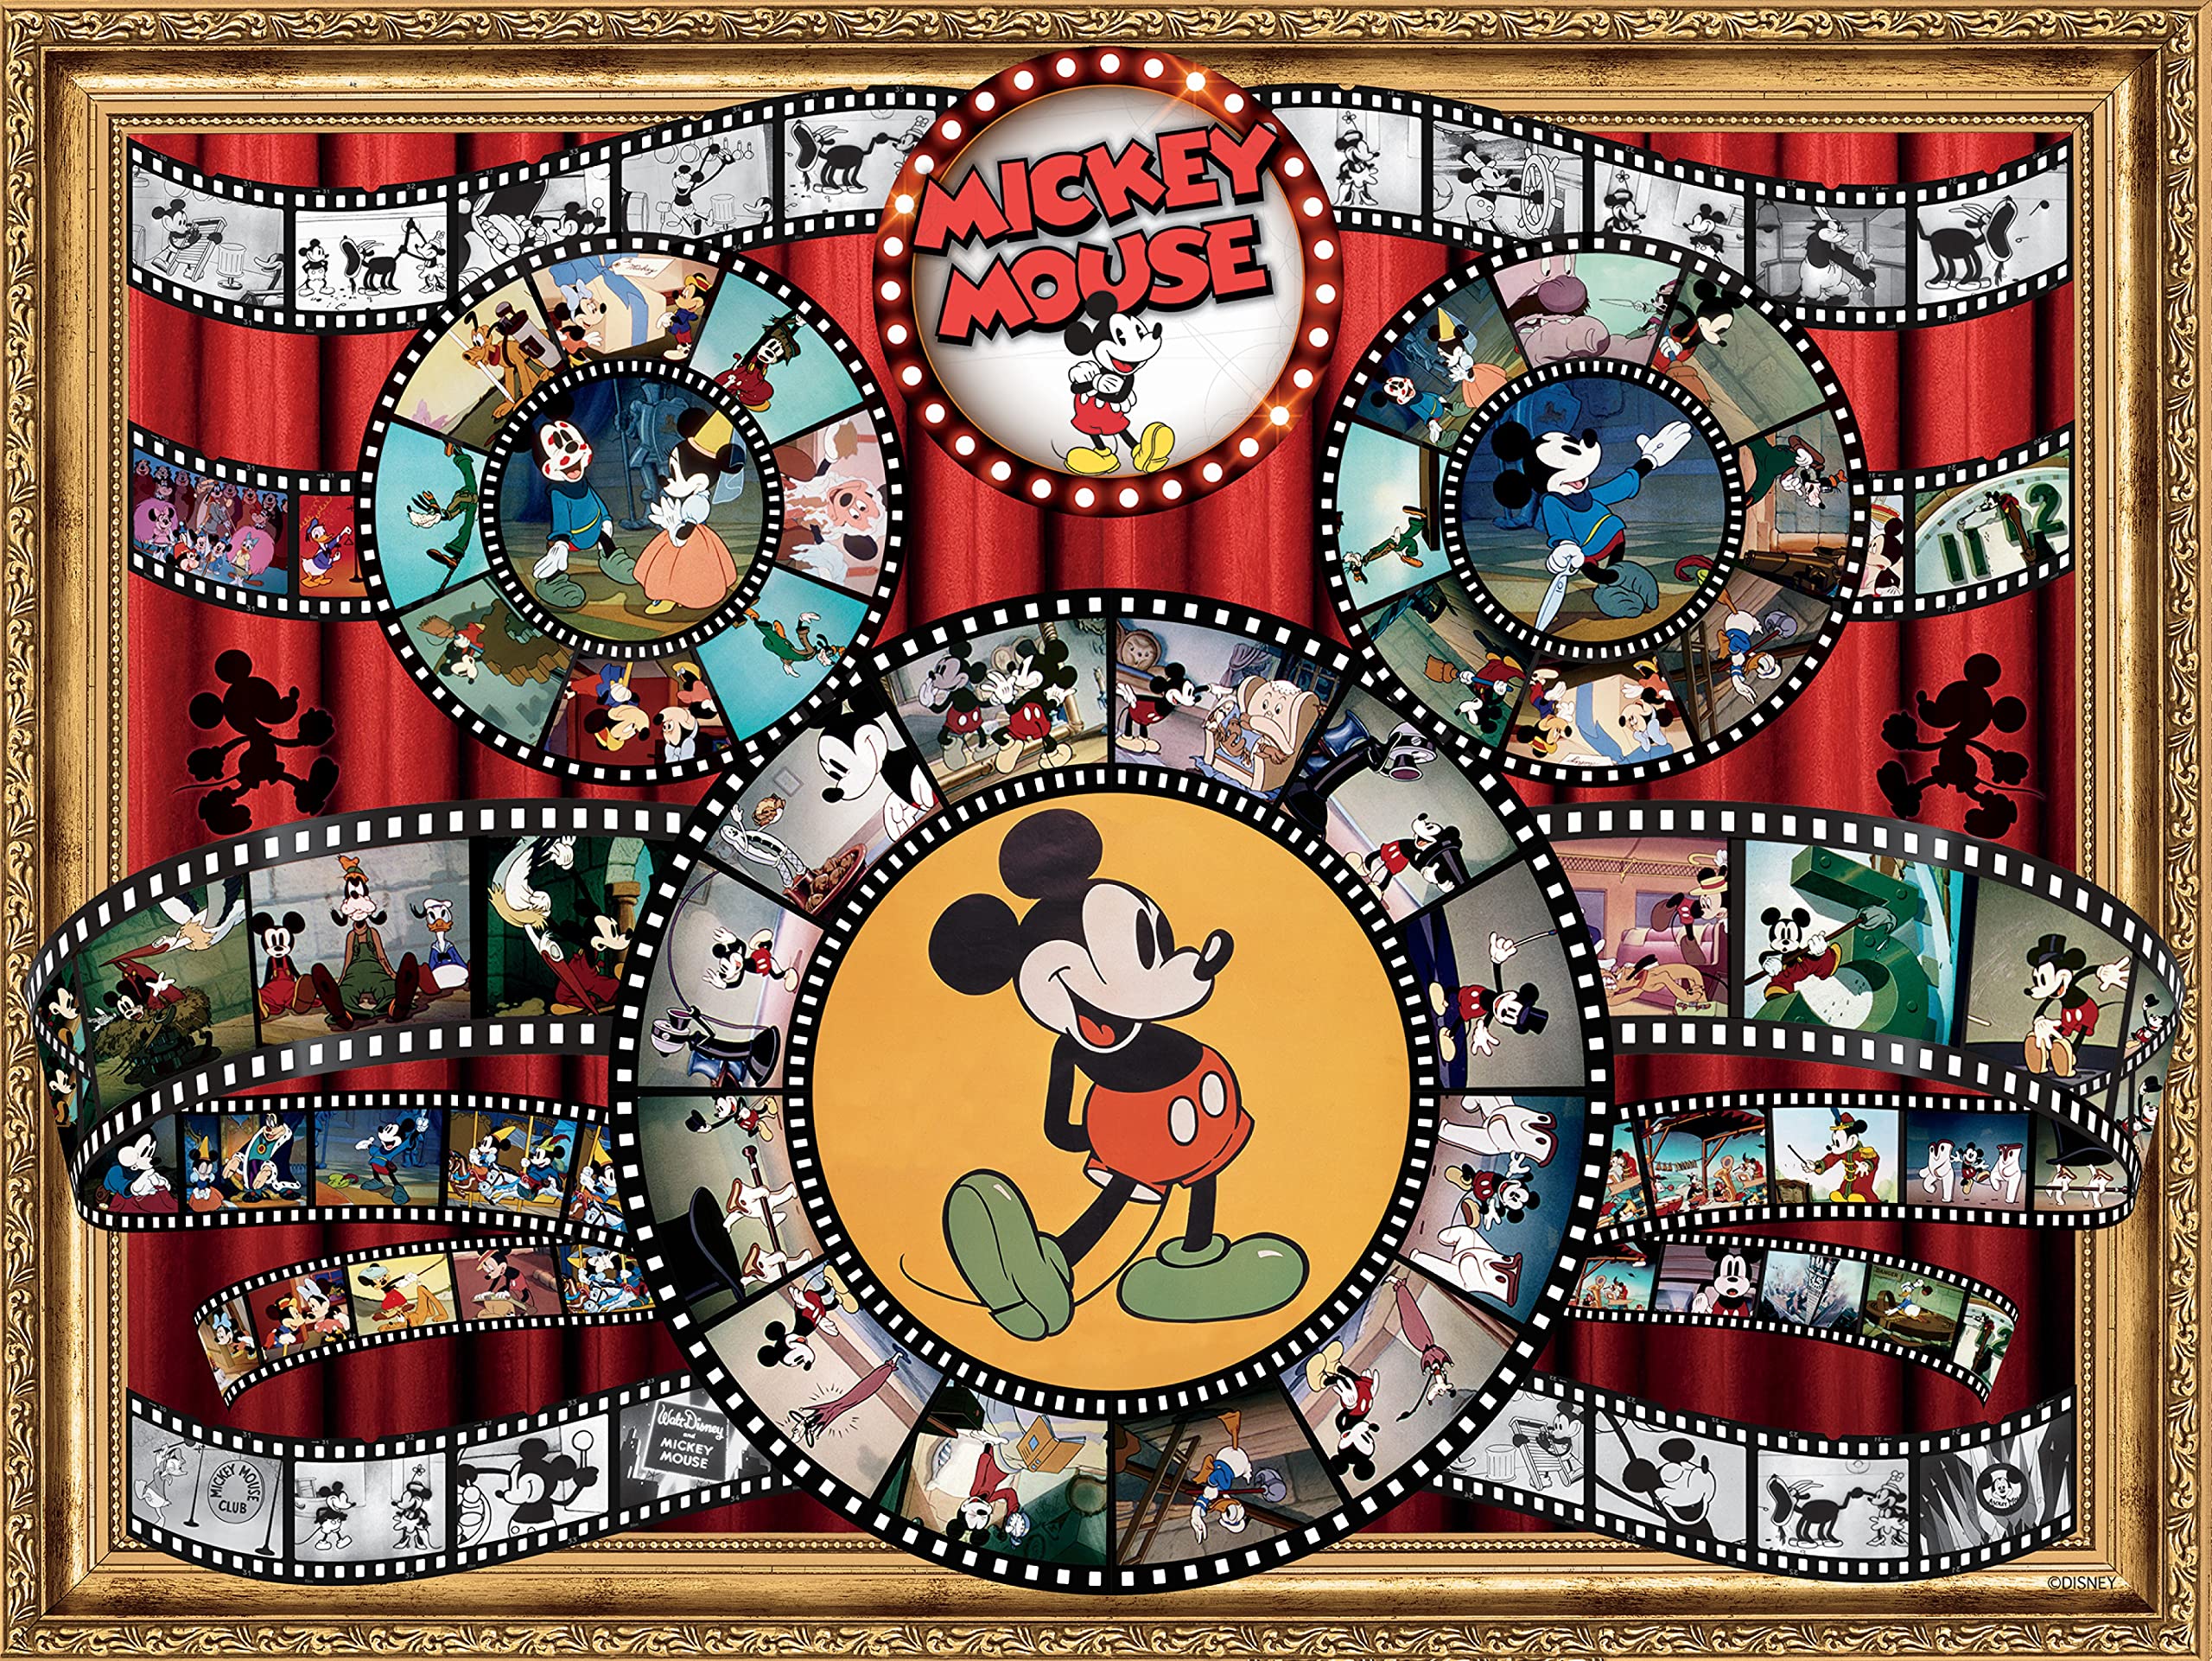 Ceaco - Disney - Mickey and Minnie Mouse Movie Reel - 1500 Piece Jigsaw Puzzle